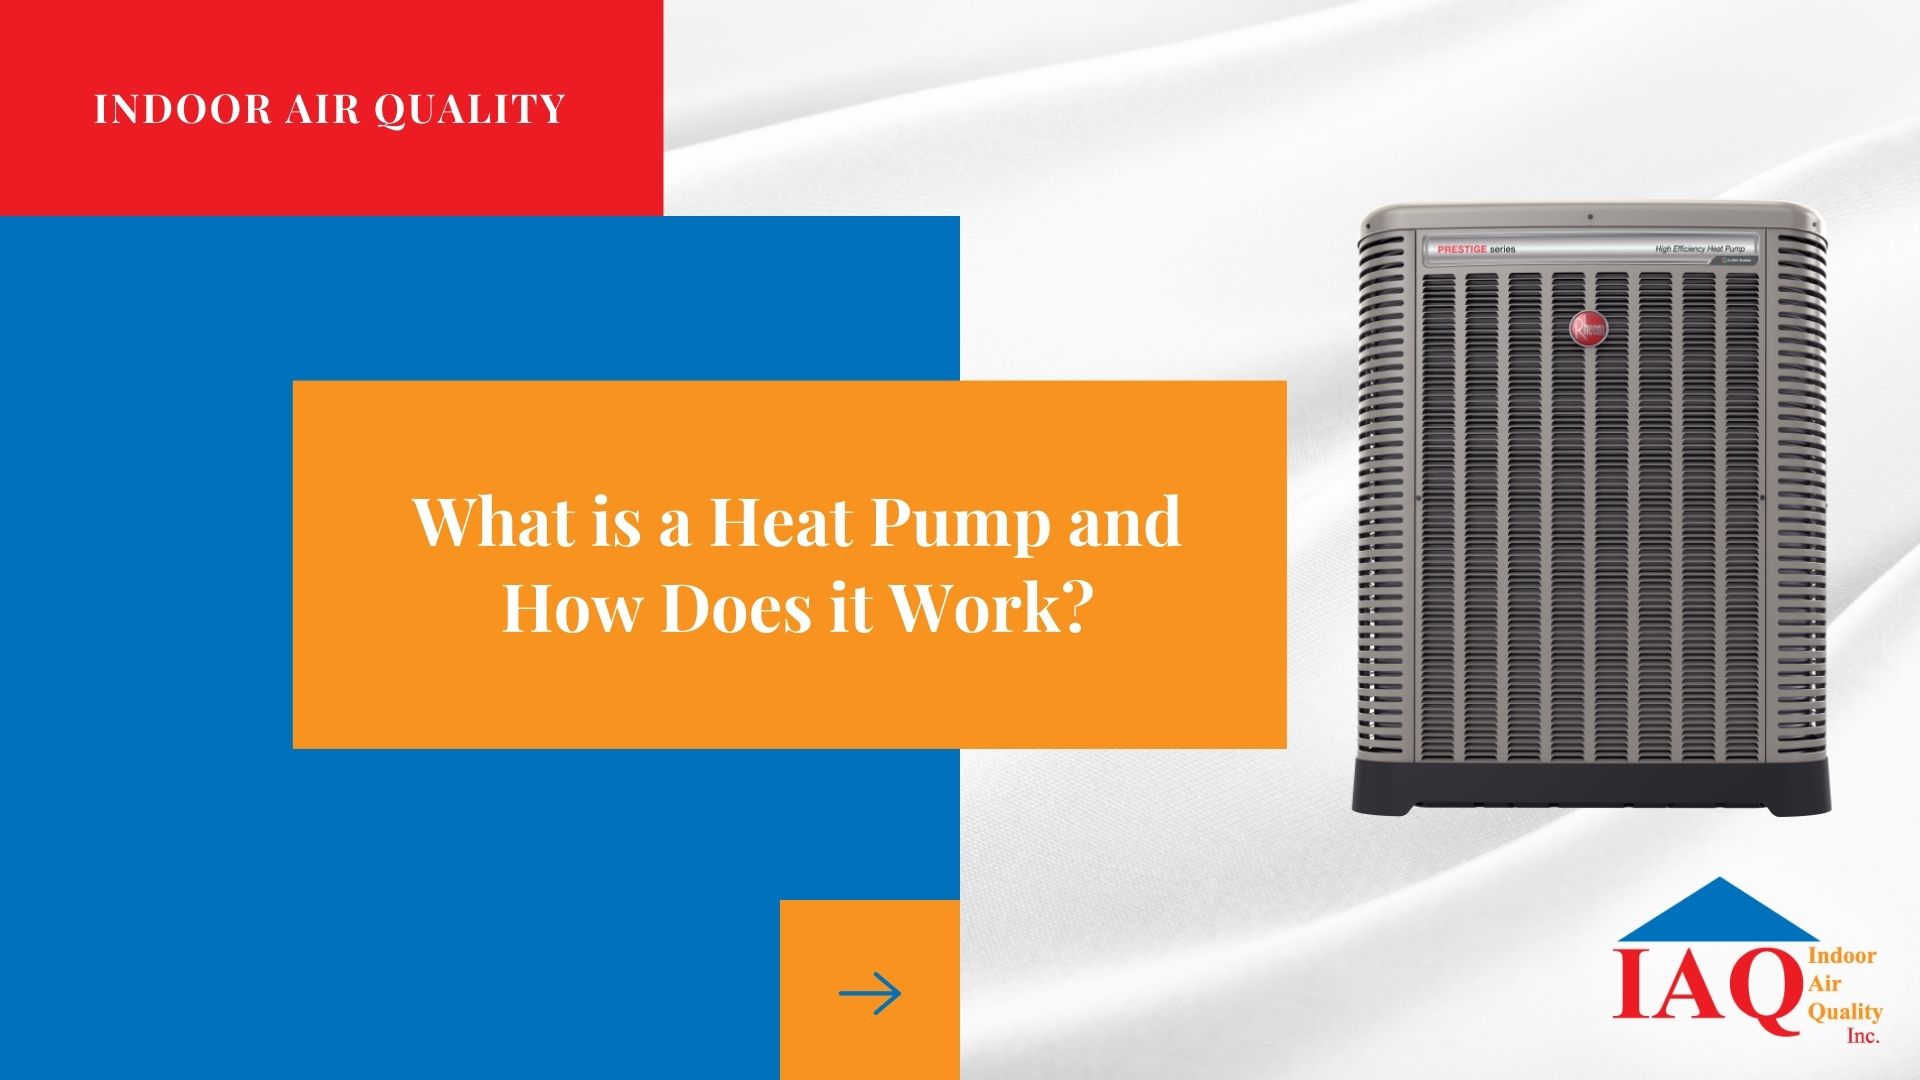 What is a Heat Pump and How Does it Work?